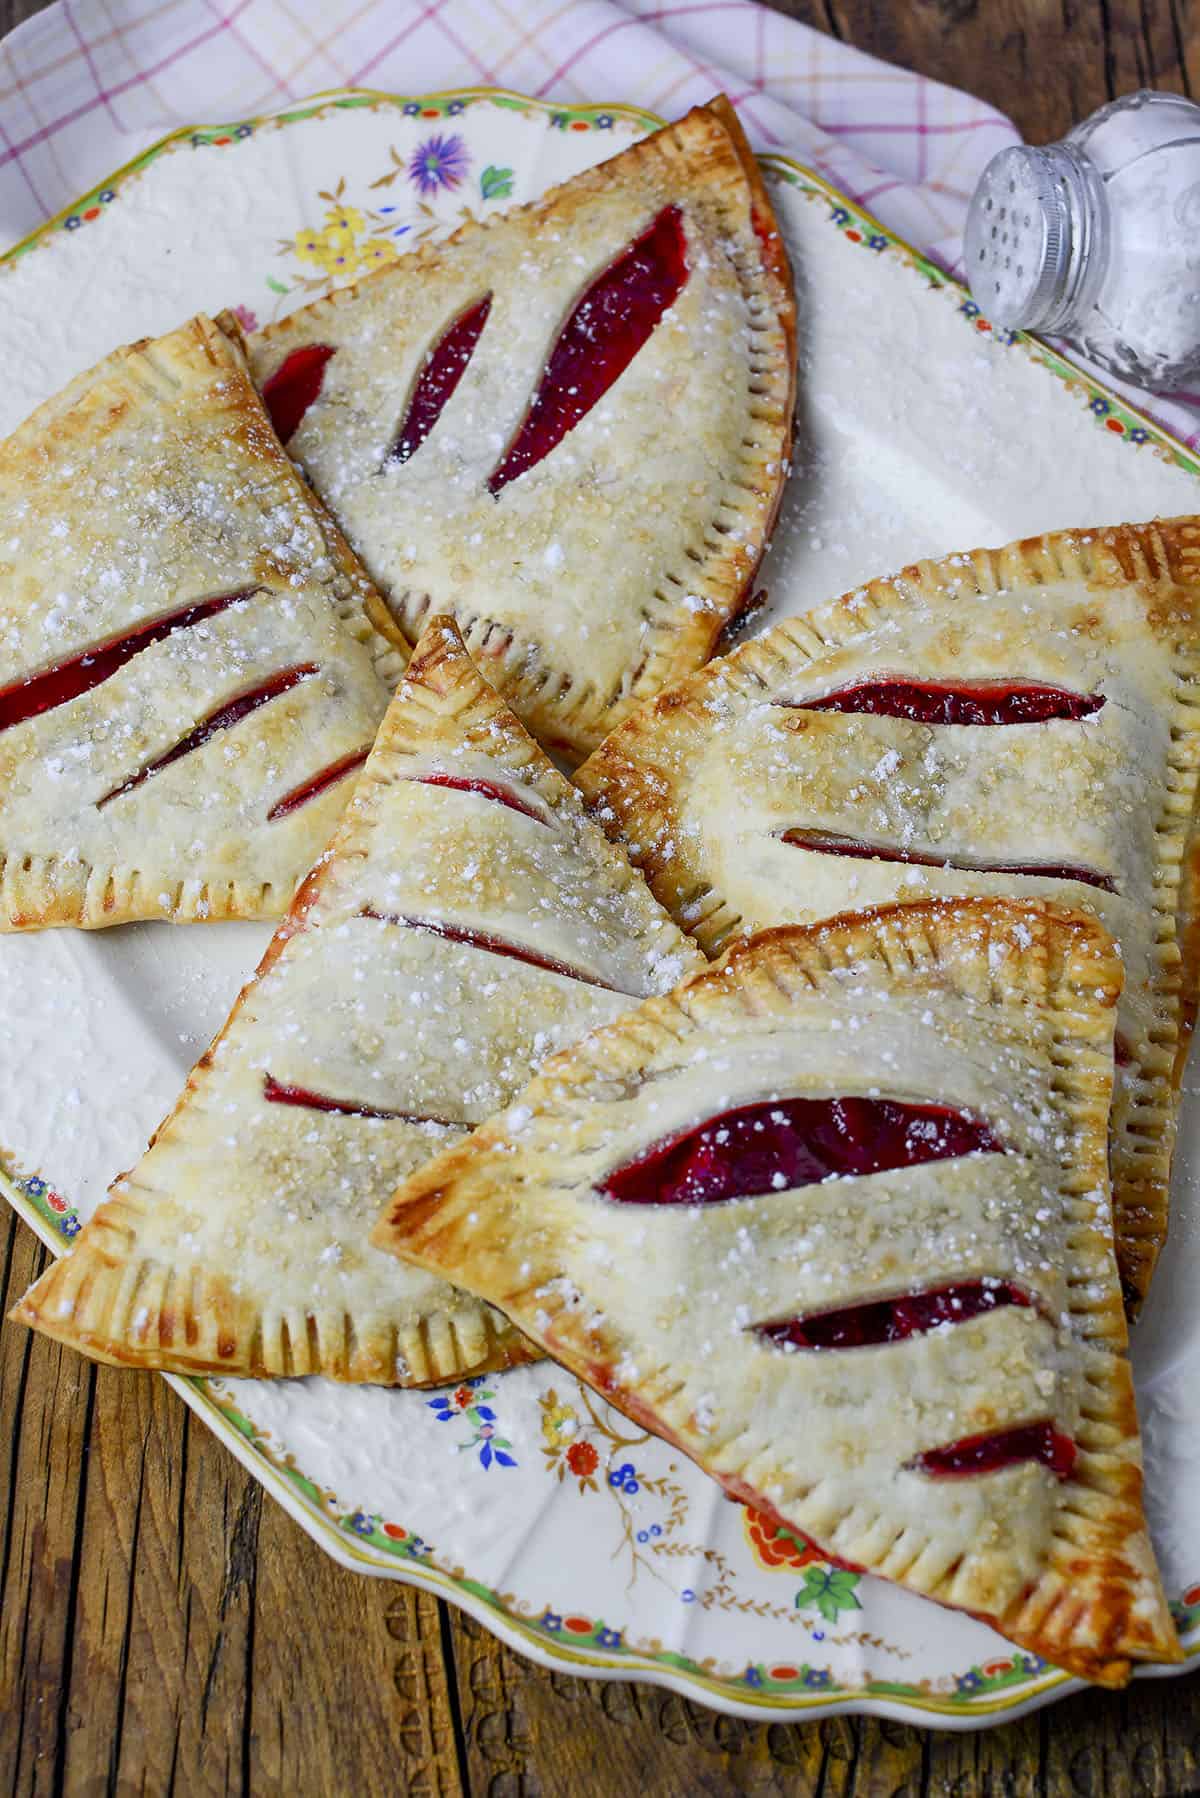 5 Strawberry Rhubarb Hand Pies on a decorative plate.